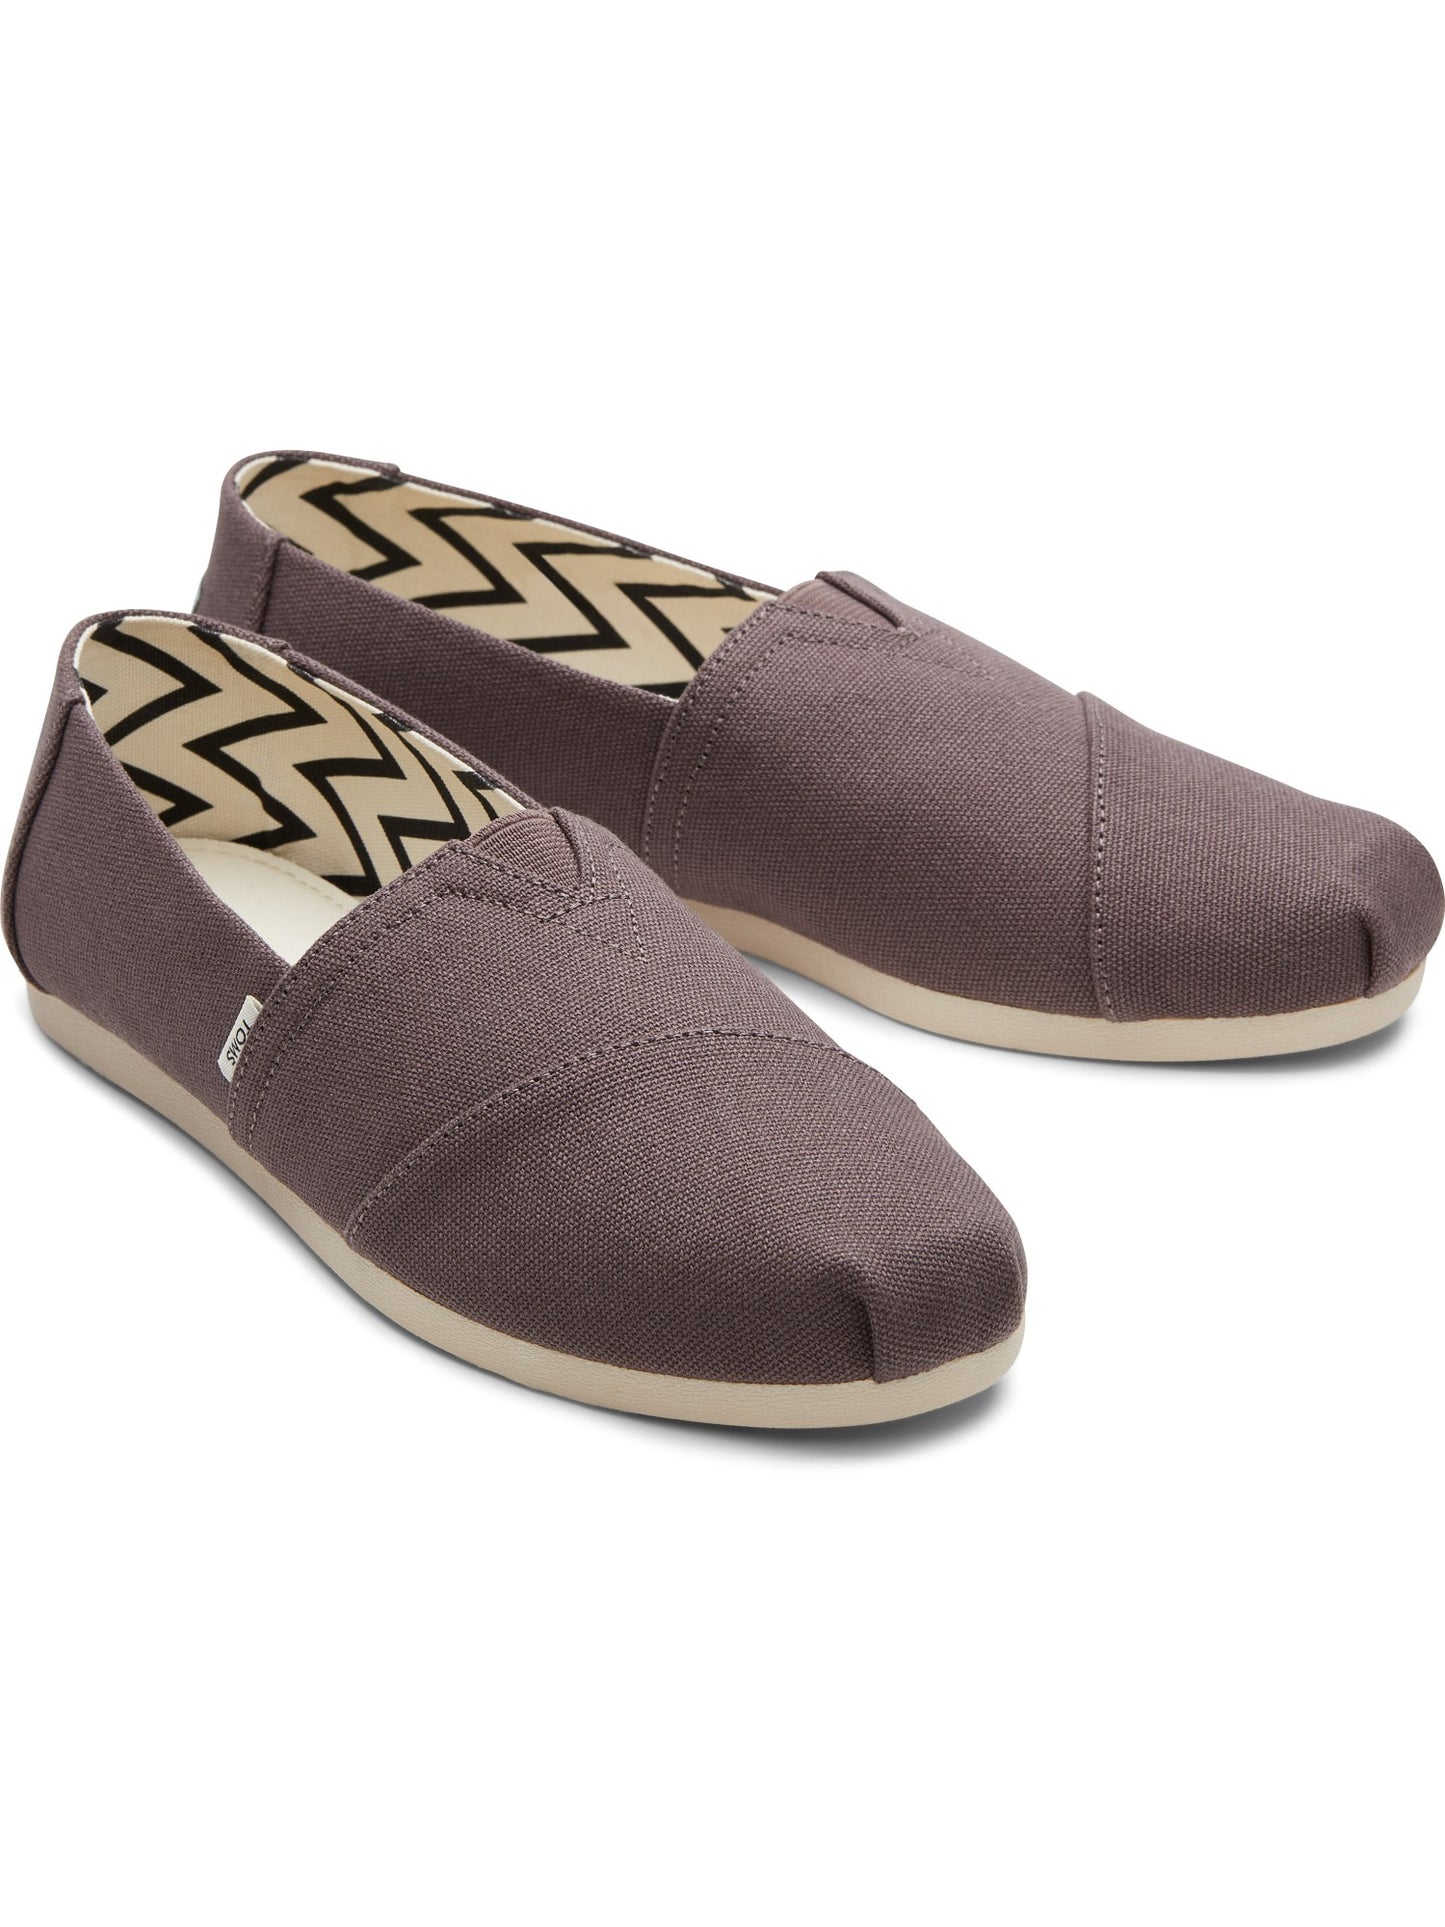 Organic Cotton Canvas Slip Ons-TOMS® India Official Site